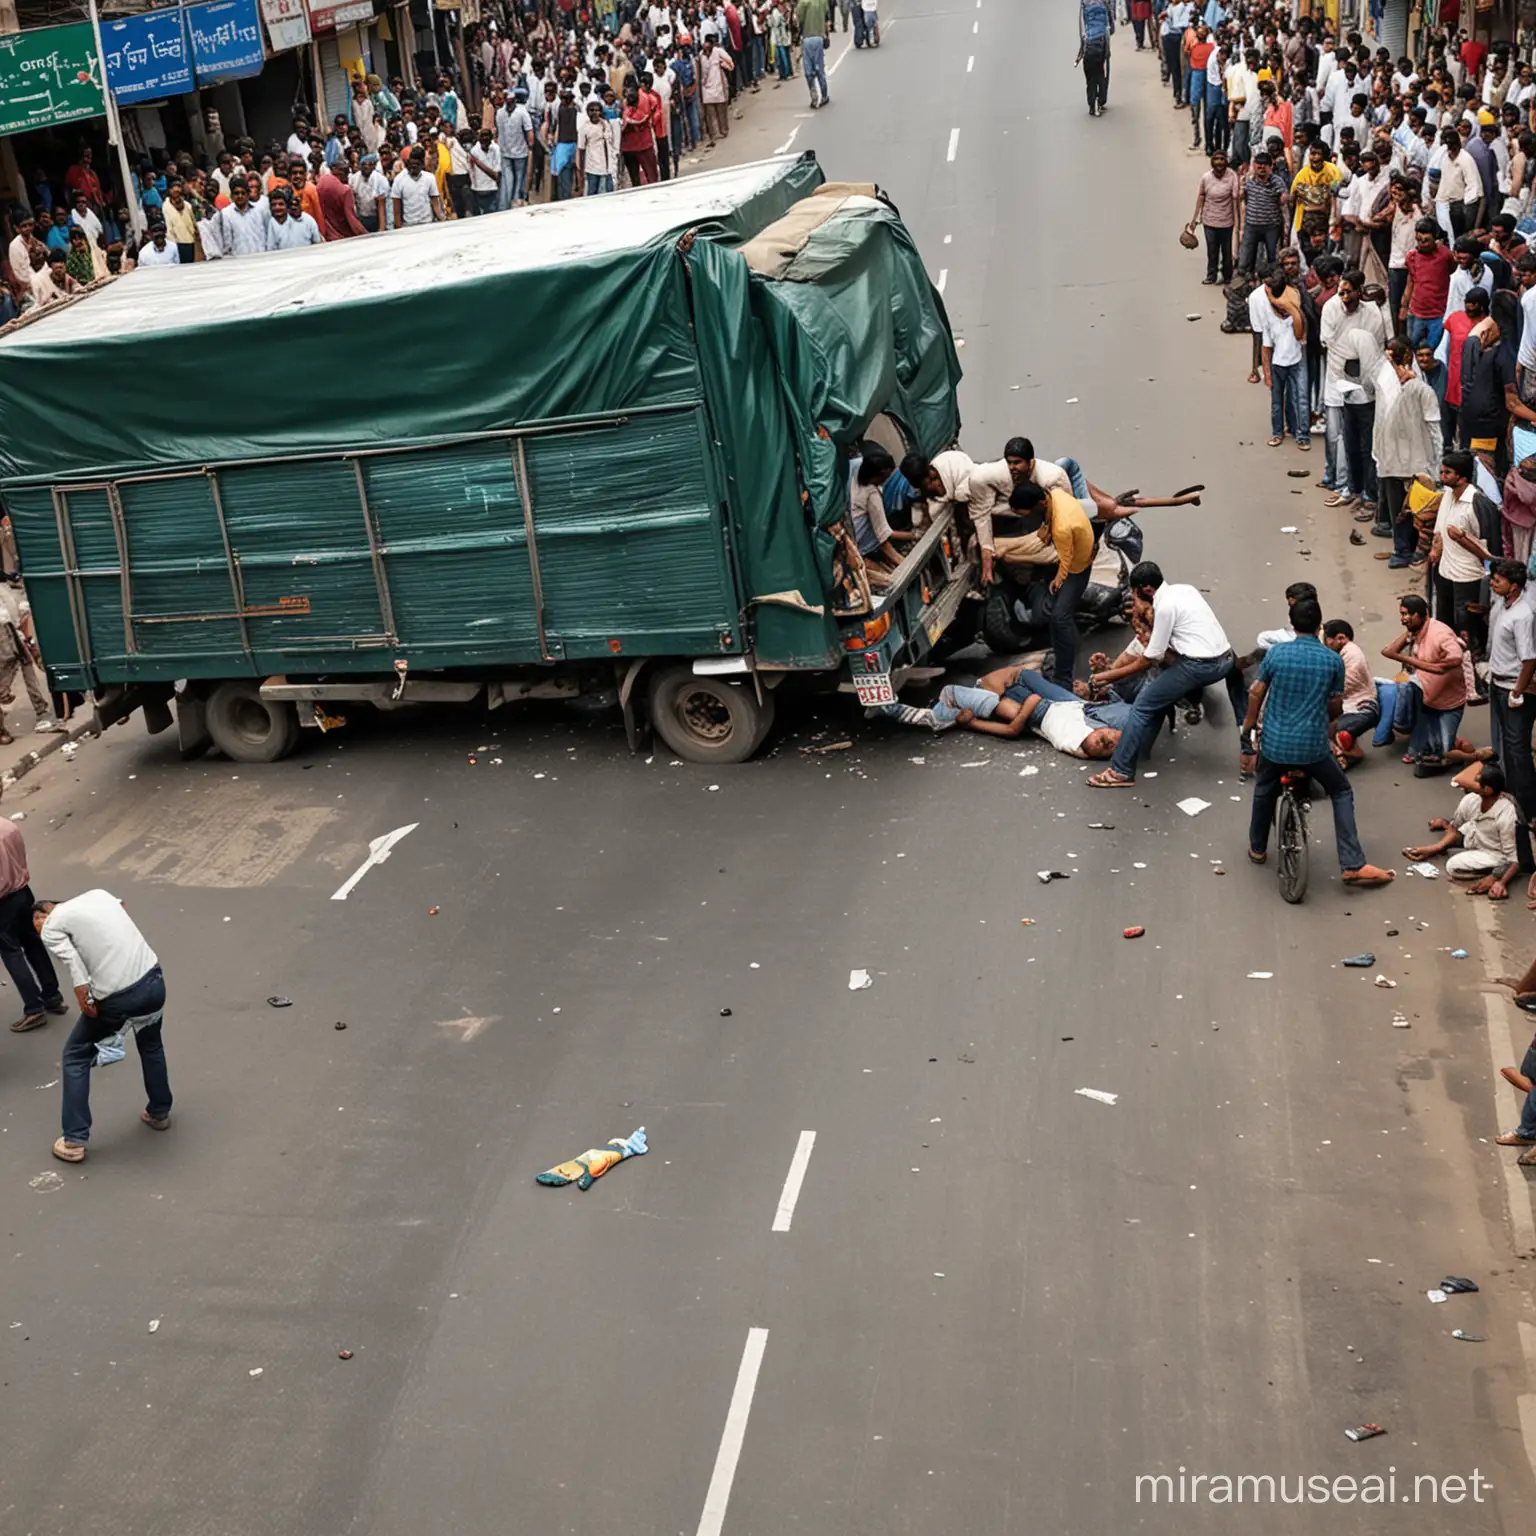 Traffic Accident Young Indian Man Struck by Truck in Busy Street